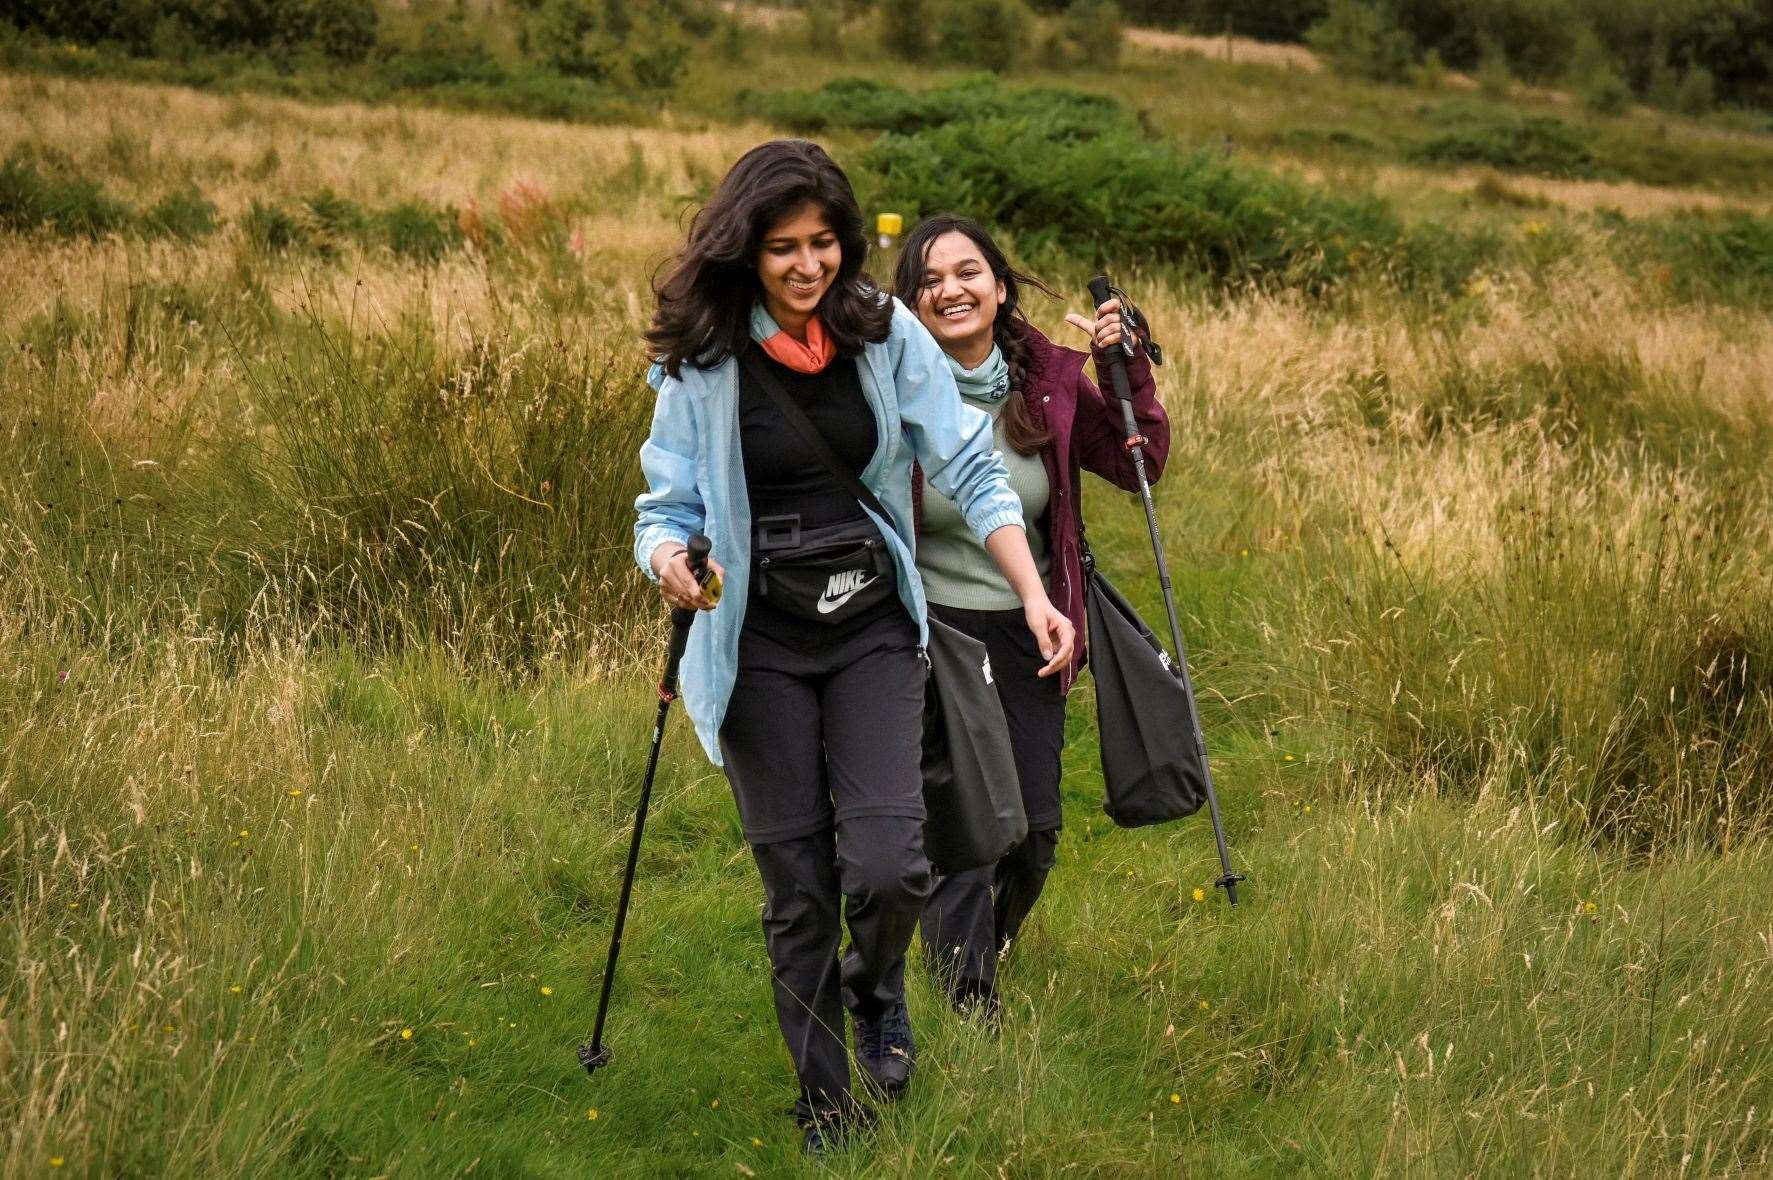 People in the north-east have been encouraged to get involved with the Ramblers Scotland’s Out There Award training scheme.